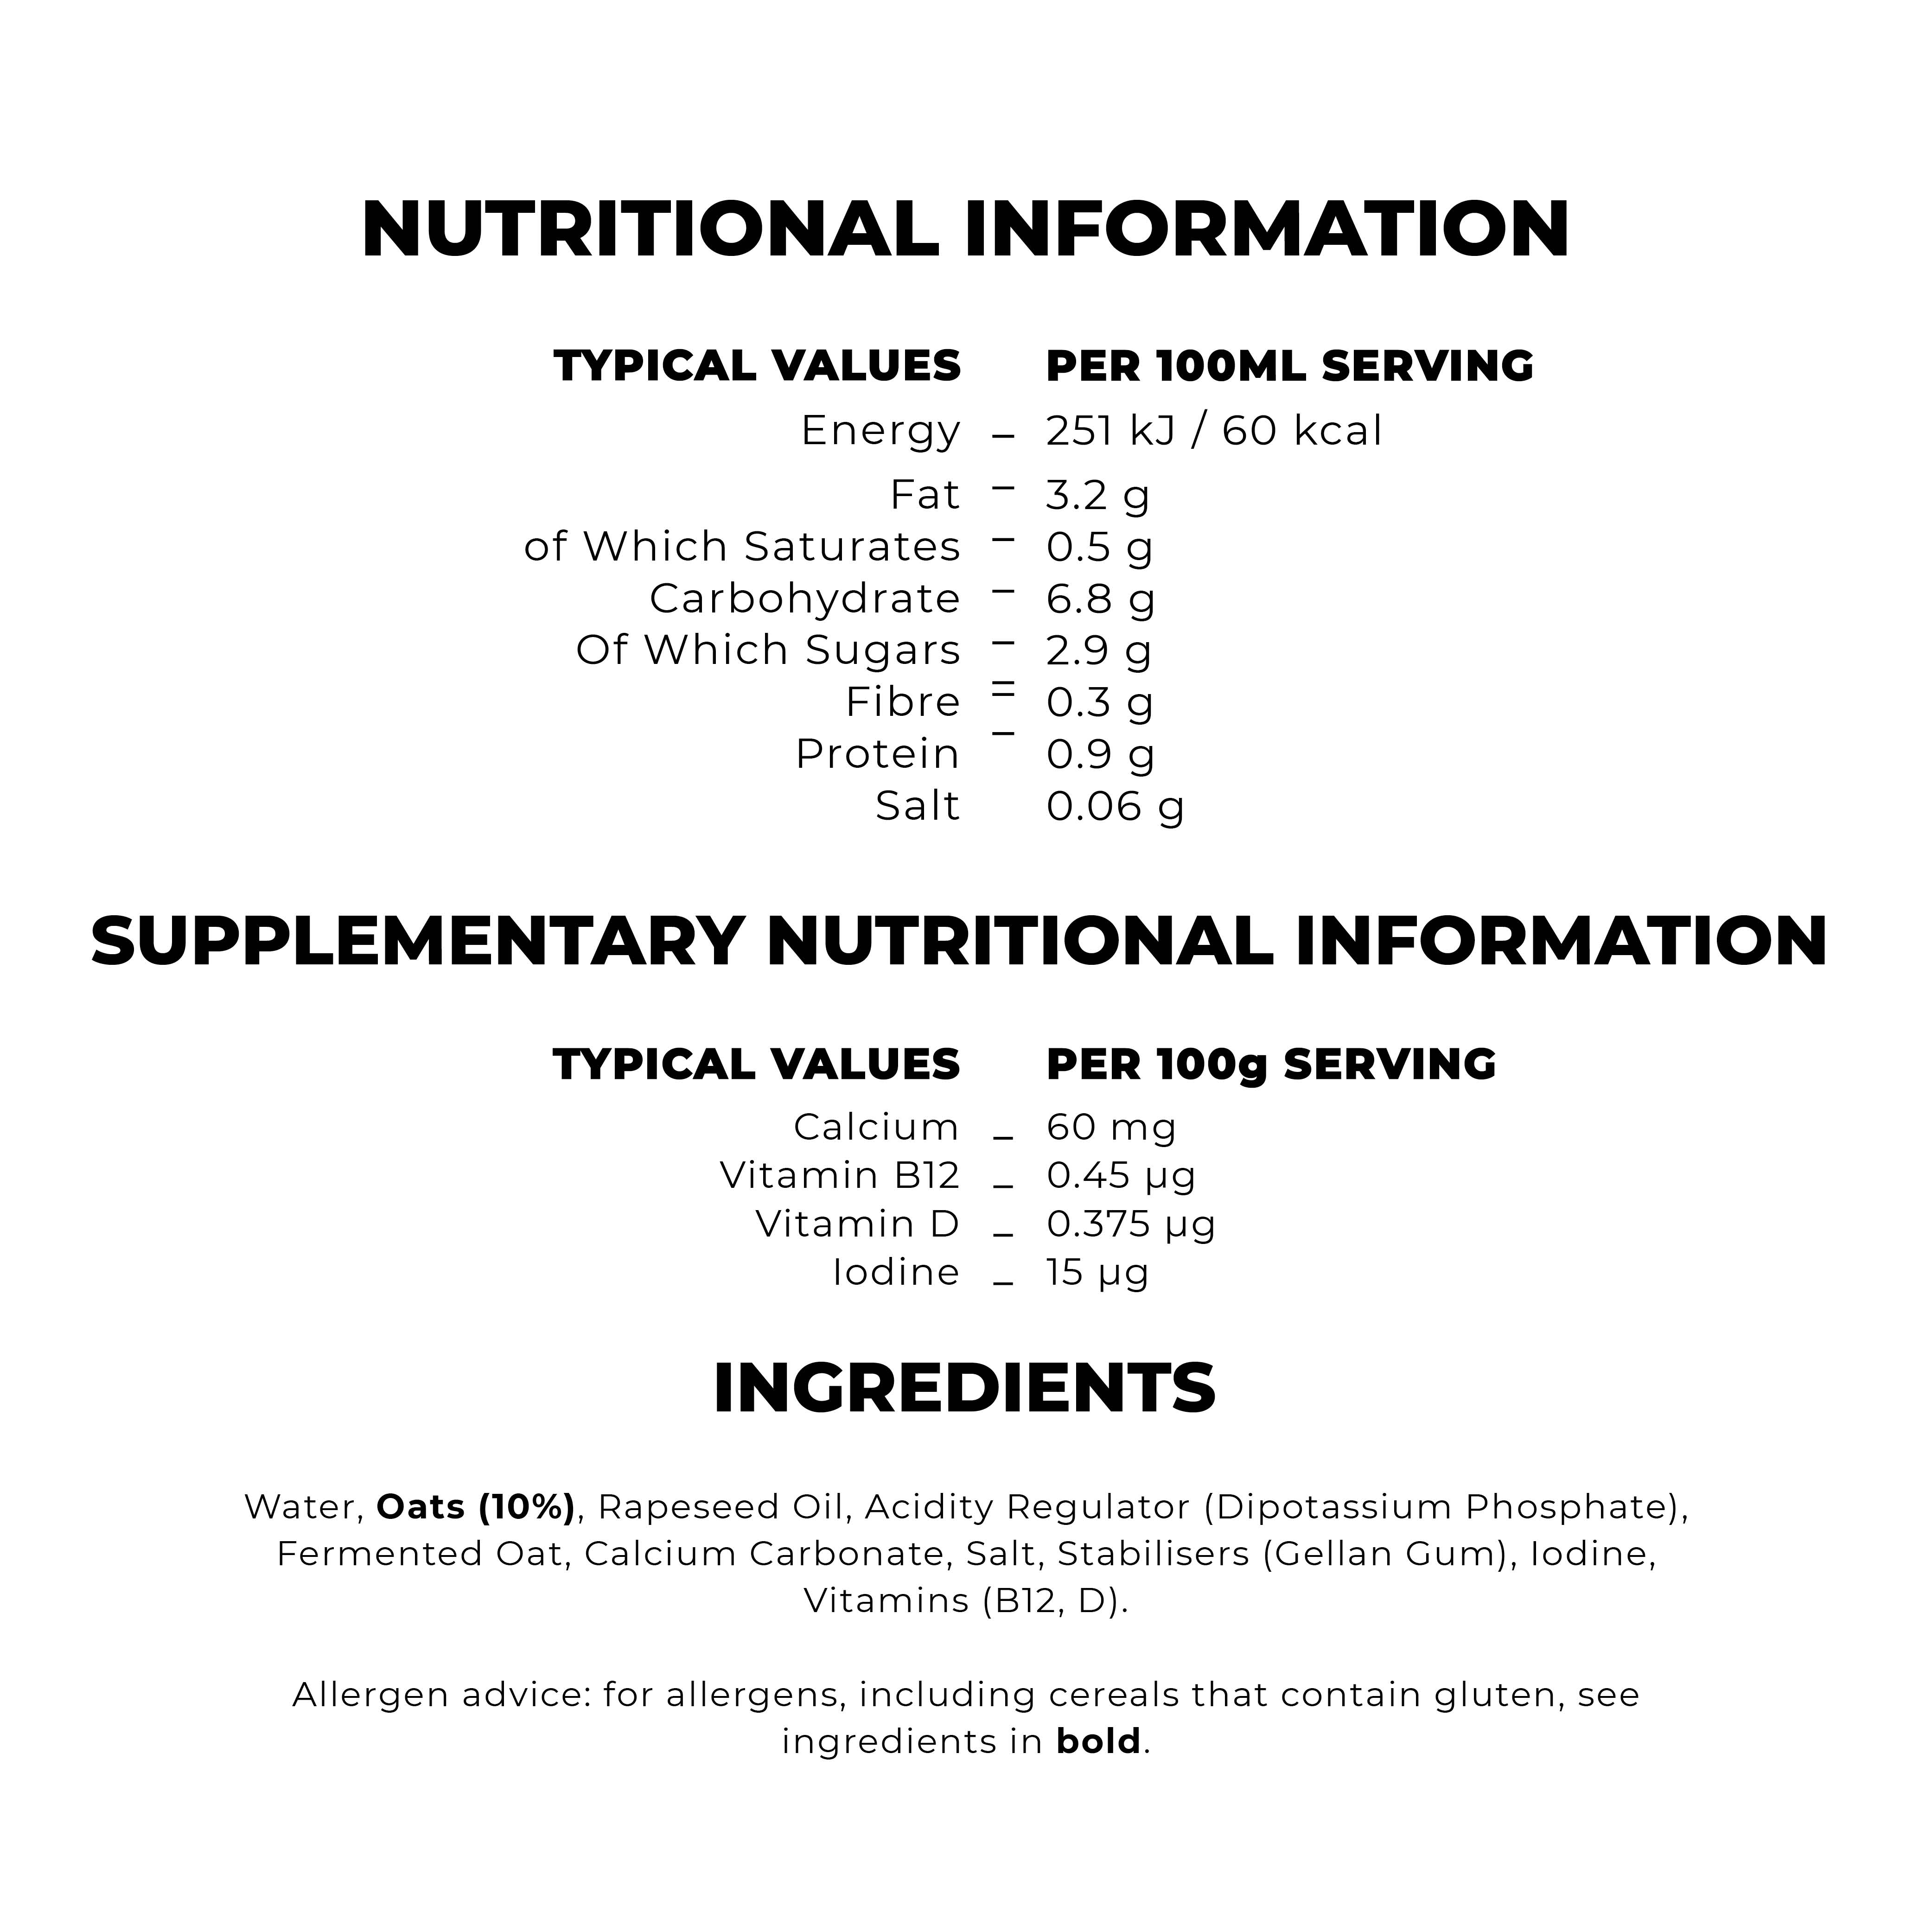 
                          NUTRITIONAL INFORMATION
                          TYPICAL VALUES
                          PER IOOML SERVING
                          - 251 kJ / 60 kcal
                          Energy
                          Fat ¯
                          3.2 g
                          of Which Saturates -
                          0.5 g
                          Carbohydrate -
                          6.8 g
                          Of Which Sugars
                          - 2.9 g
                          Fibre
                          0.3 g
                          Protein
                          0.9 g
                          Salt
                          0.06 g
                          SUPPLEMENTARY NUTRITIONAL INFORMATION
                          TYPICAL VALUES
                          Calcium
                          Vitamin B12
                          Vitamin D
                          Iodine
                          PER loog SERVING
                          - 60 mg
                          0.45 pg
                          - 0.375 pg
                          - 15 pg
                          INGREDIENTS
                          Water, Oats (10%), Rapeseed Oil, Acidity Regulator (Dipotassium Phosphate),
                          Fermented Oat, Calcium Carbonate, Salt, Stabilisers (Gellan Gum), Iodine,
                          Vitamins (B12, D).
                          Allergen advice: for allergens, including cereals that contain gluten, see
                          ingredients in bold.
                          